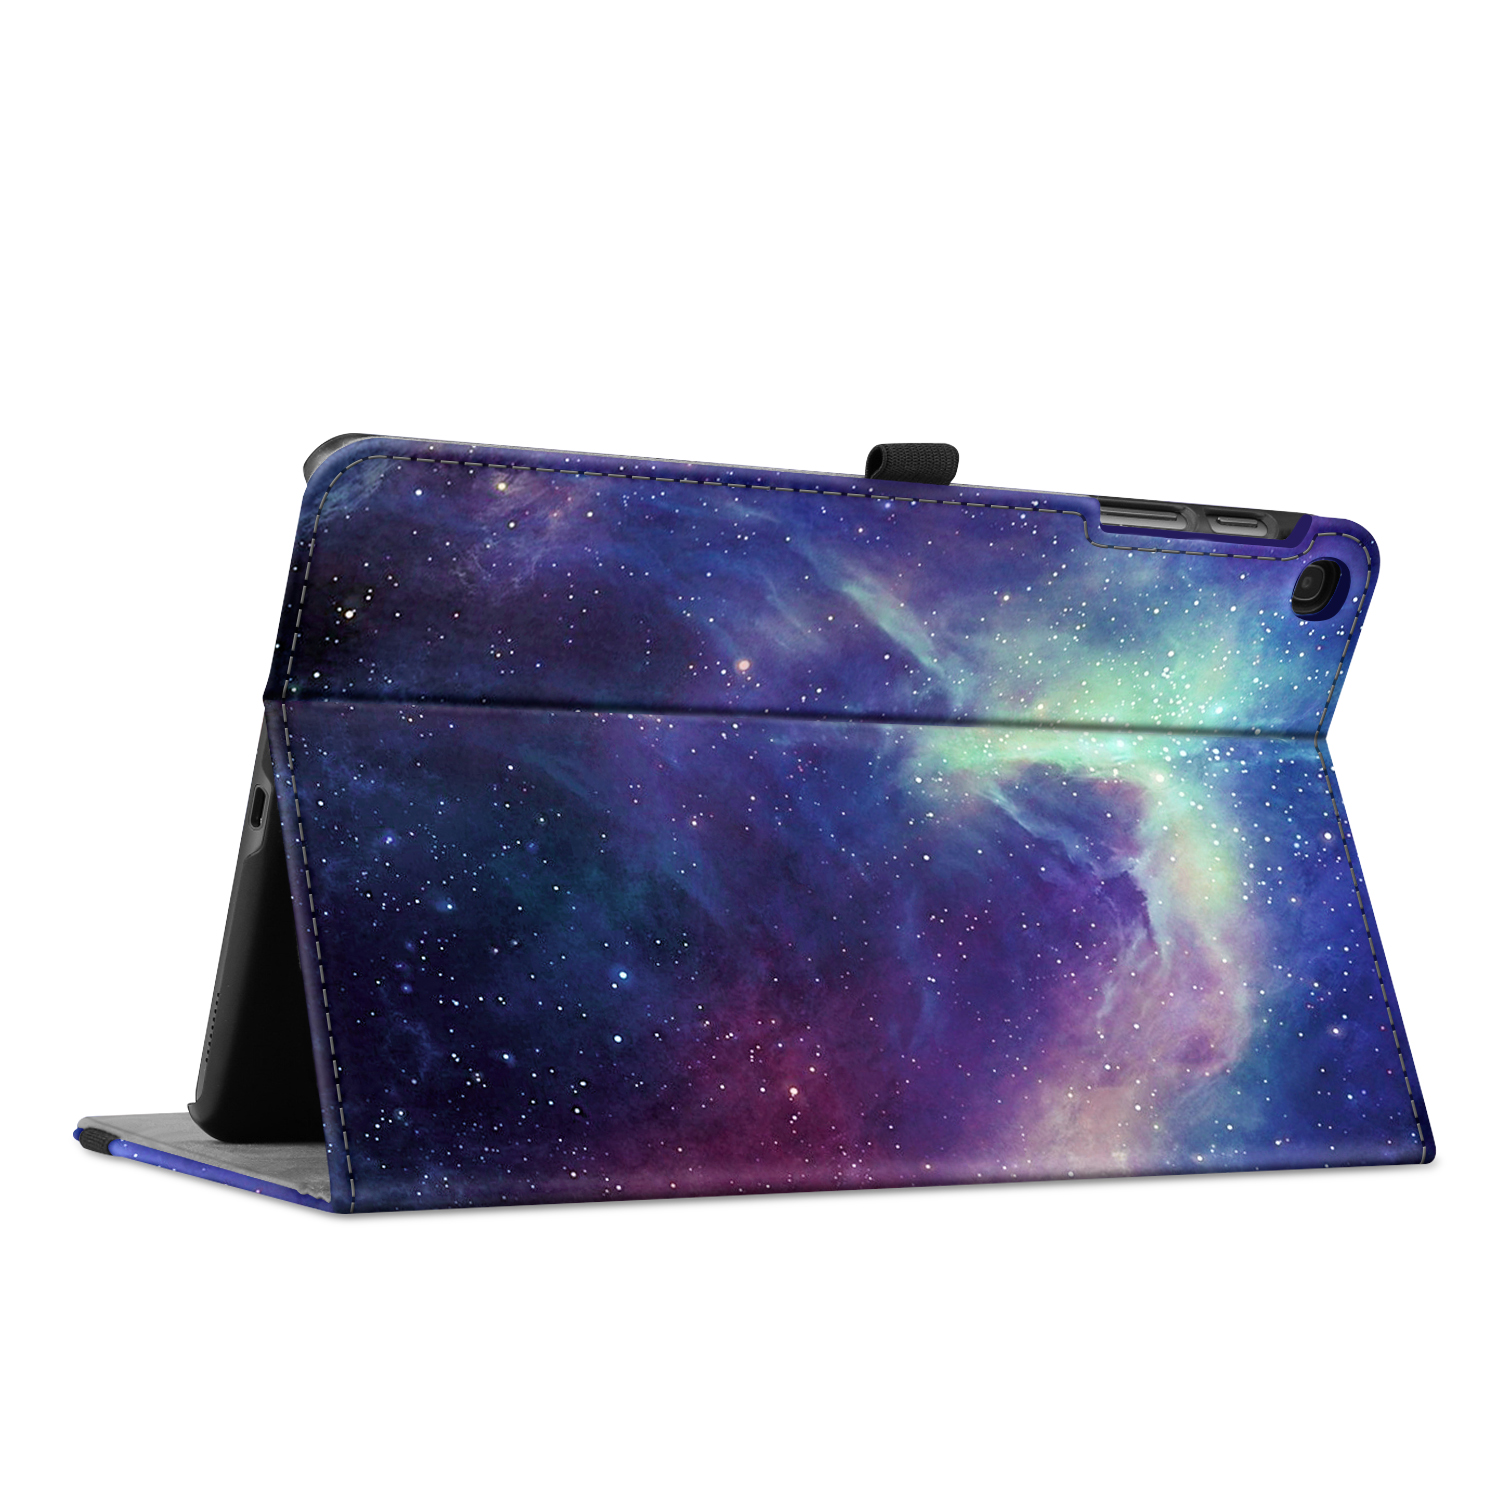 For Samsung Galaxy Tab A 10.1 SM-T510 2019 Multi-Angle Stand Case Cover